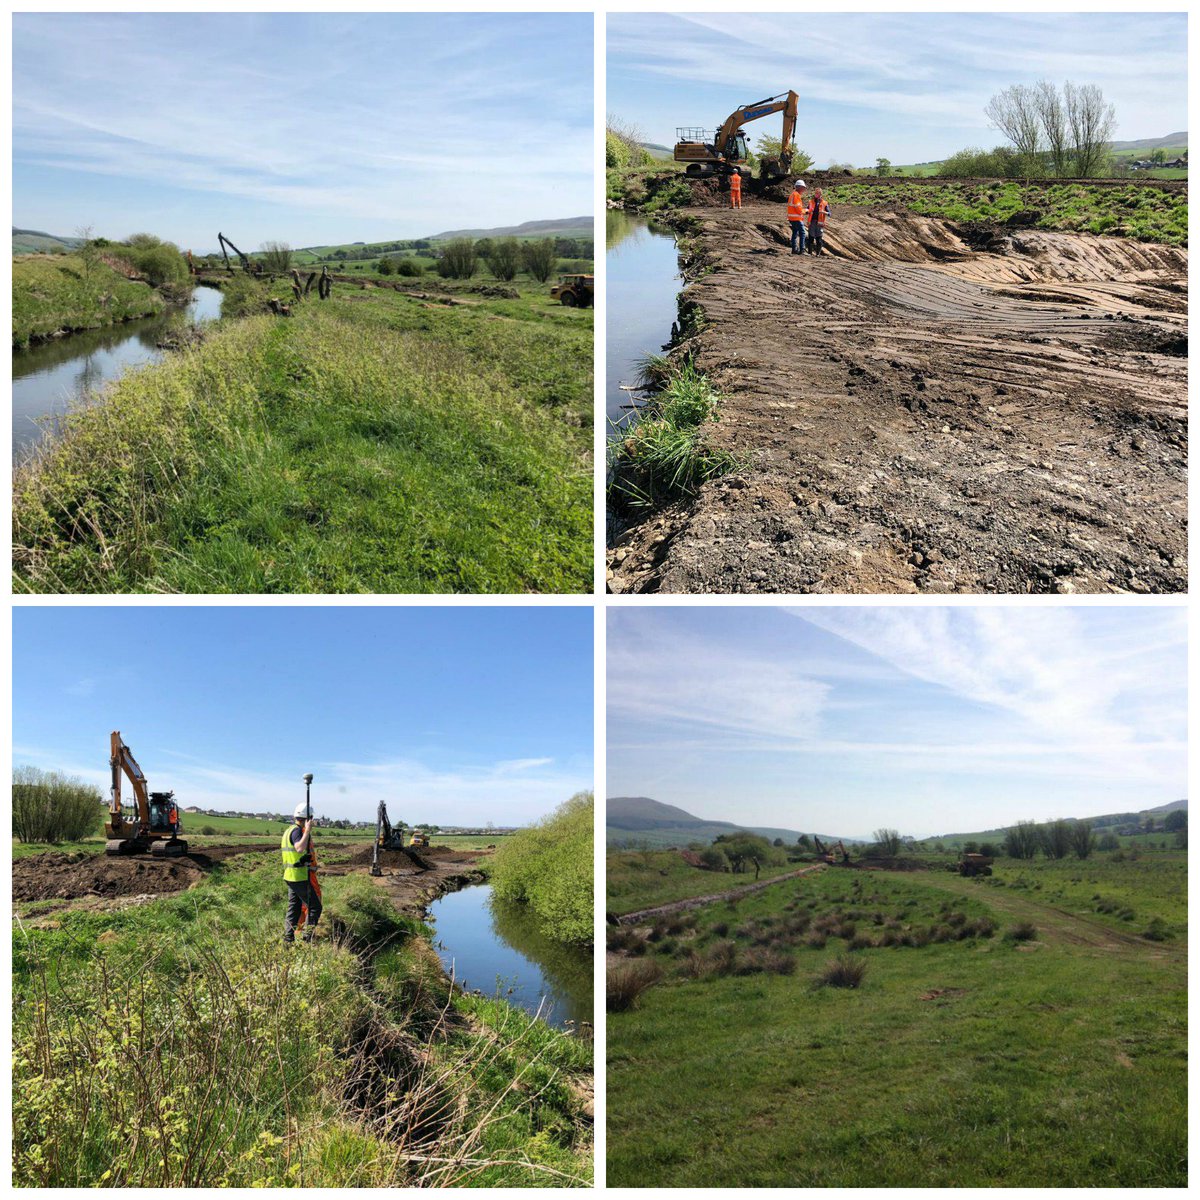 Stunning day as work goes on at the River Nith, near New Cumnock, East Ayrshire. #cbecuk #riverrestoration #environment #Nith #RiverNith #NewCumnock